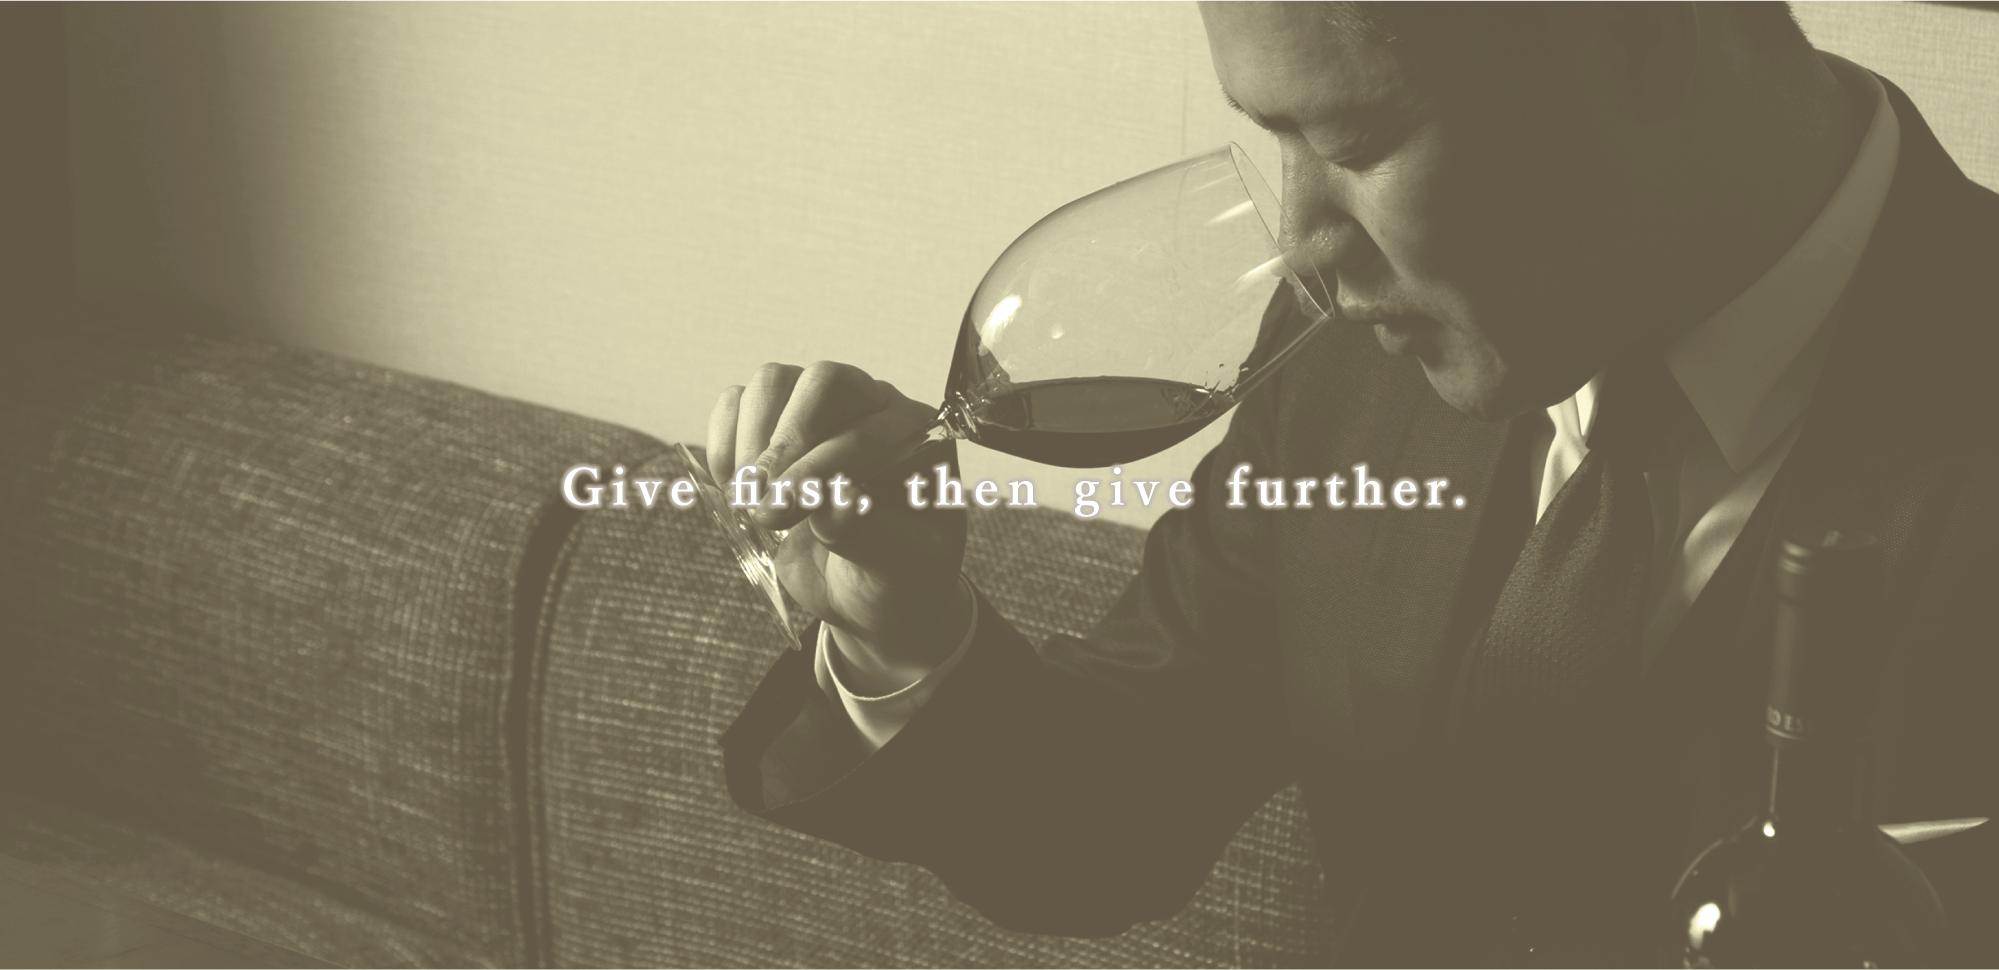 Give first, then give further.